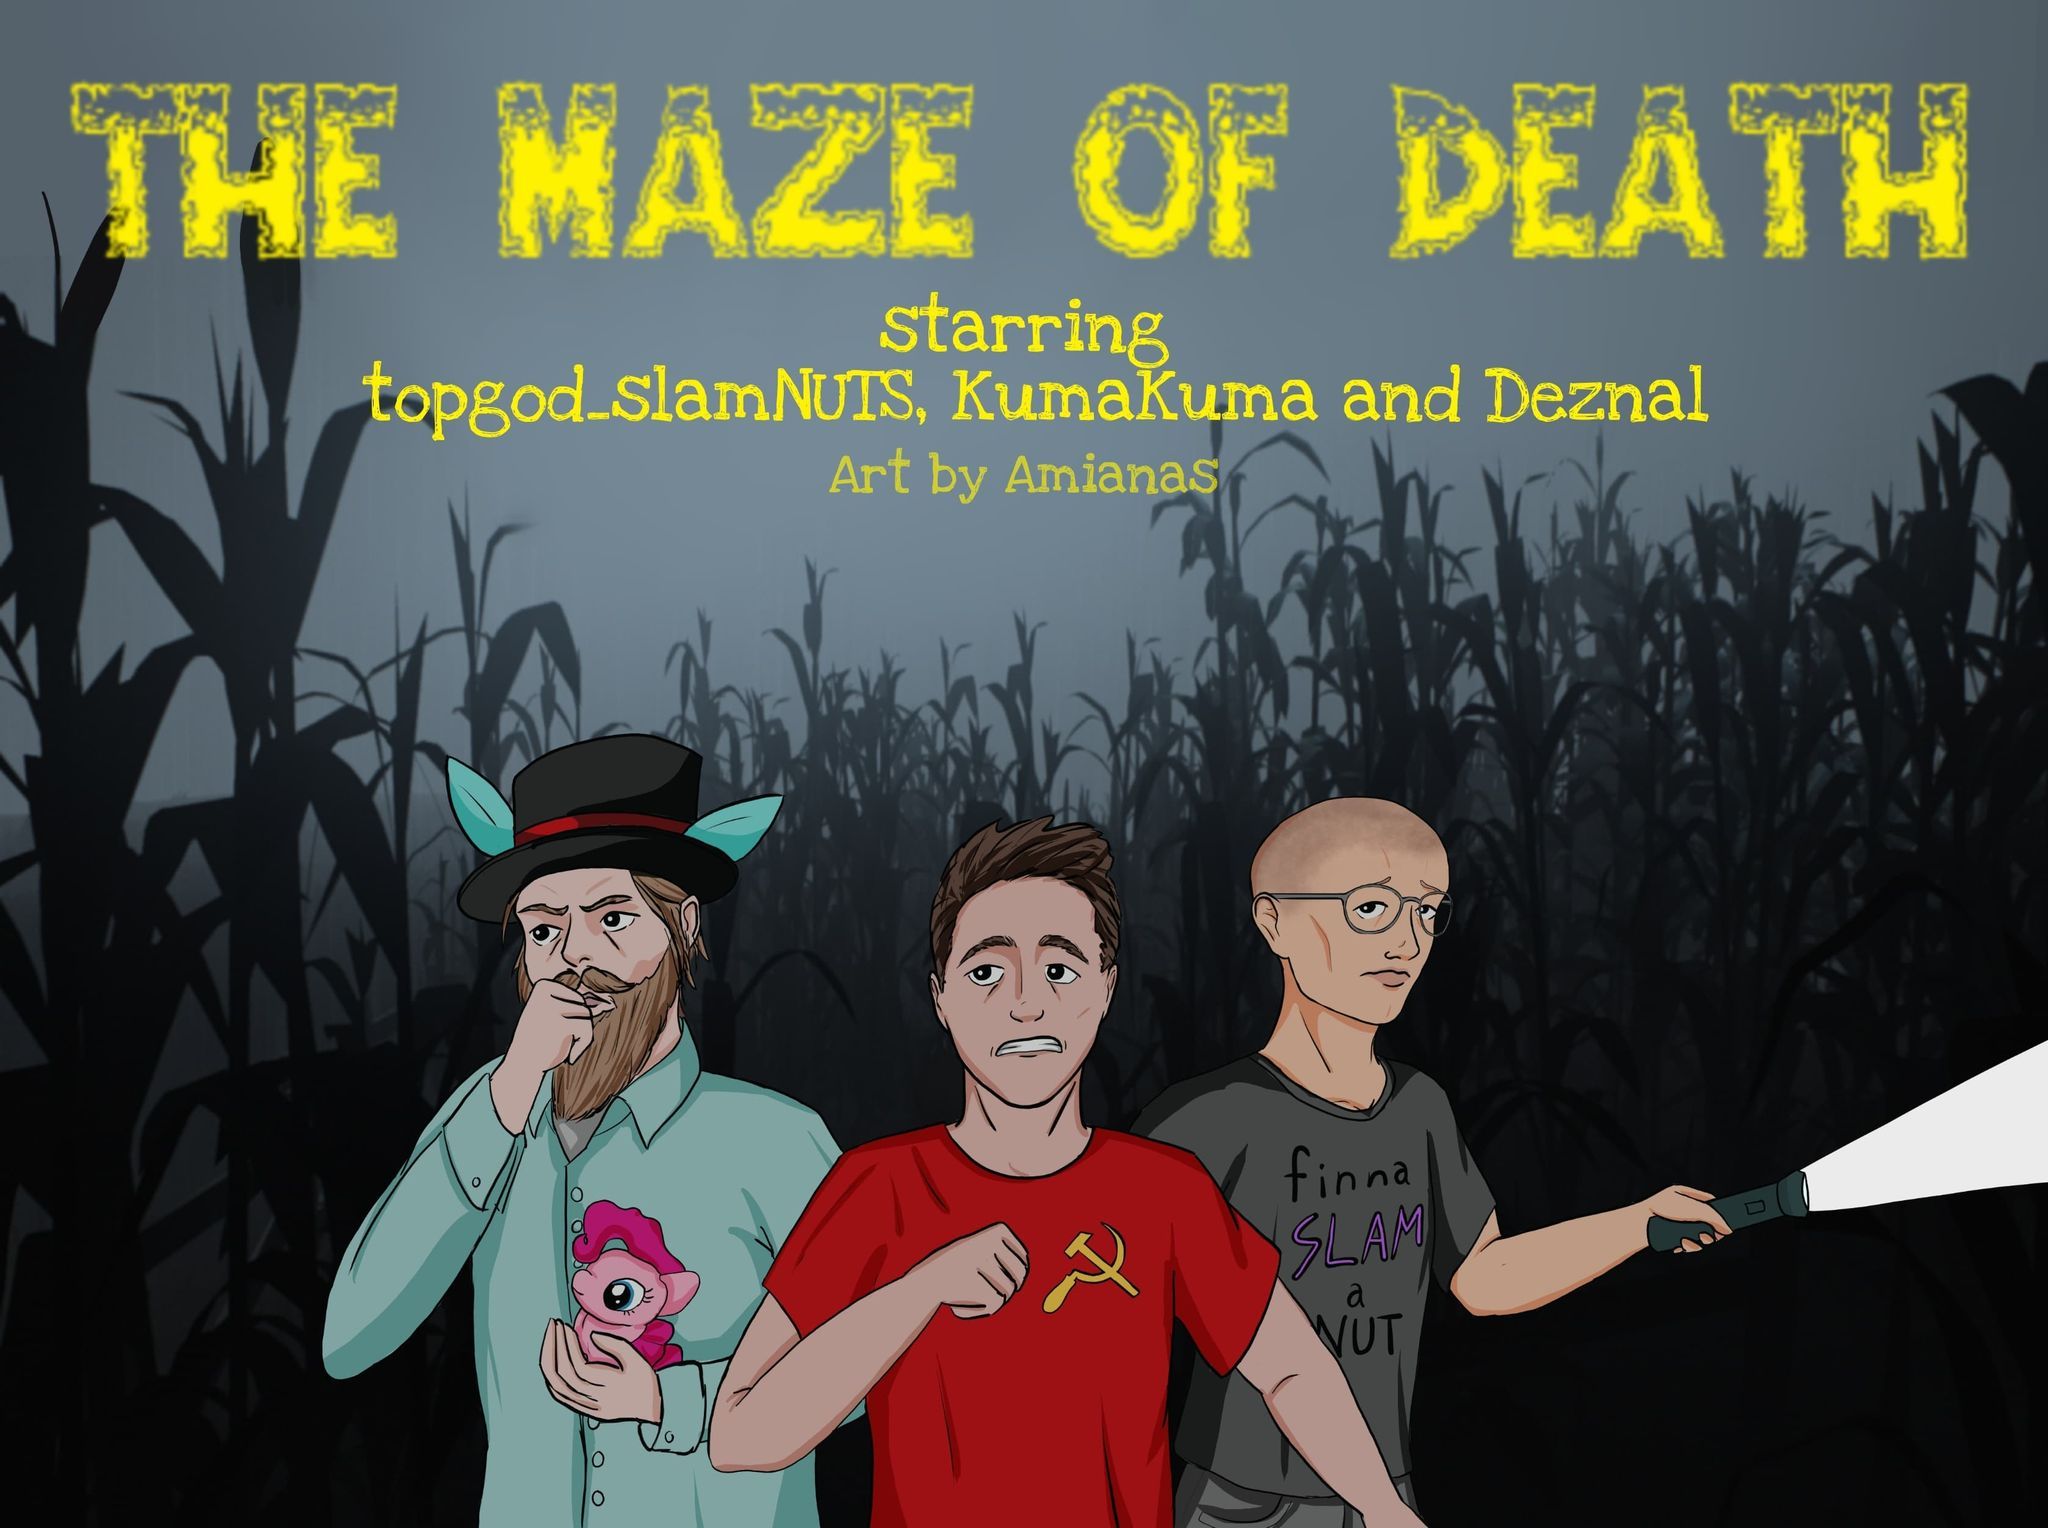 Second story of the Hugelol Spooktober Chronicles: The Maze of Death. Read it in the comments!